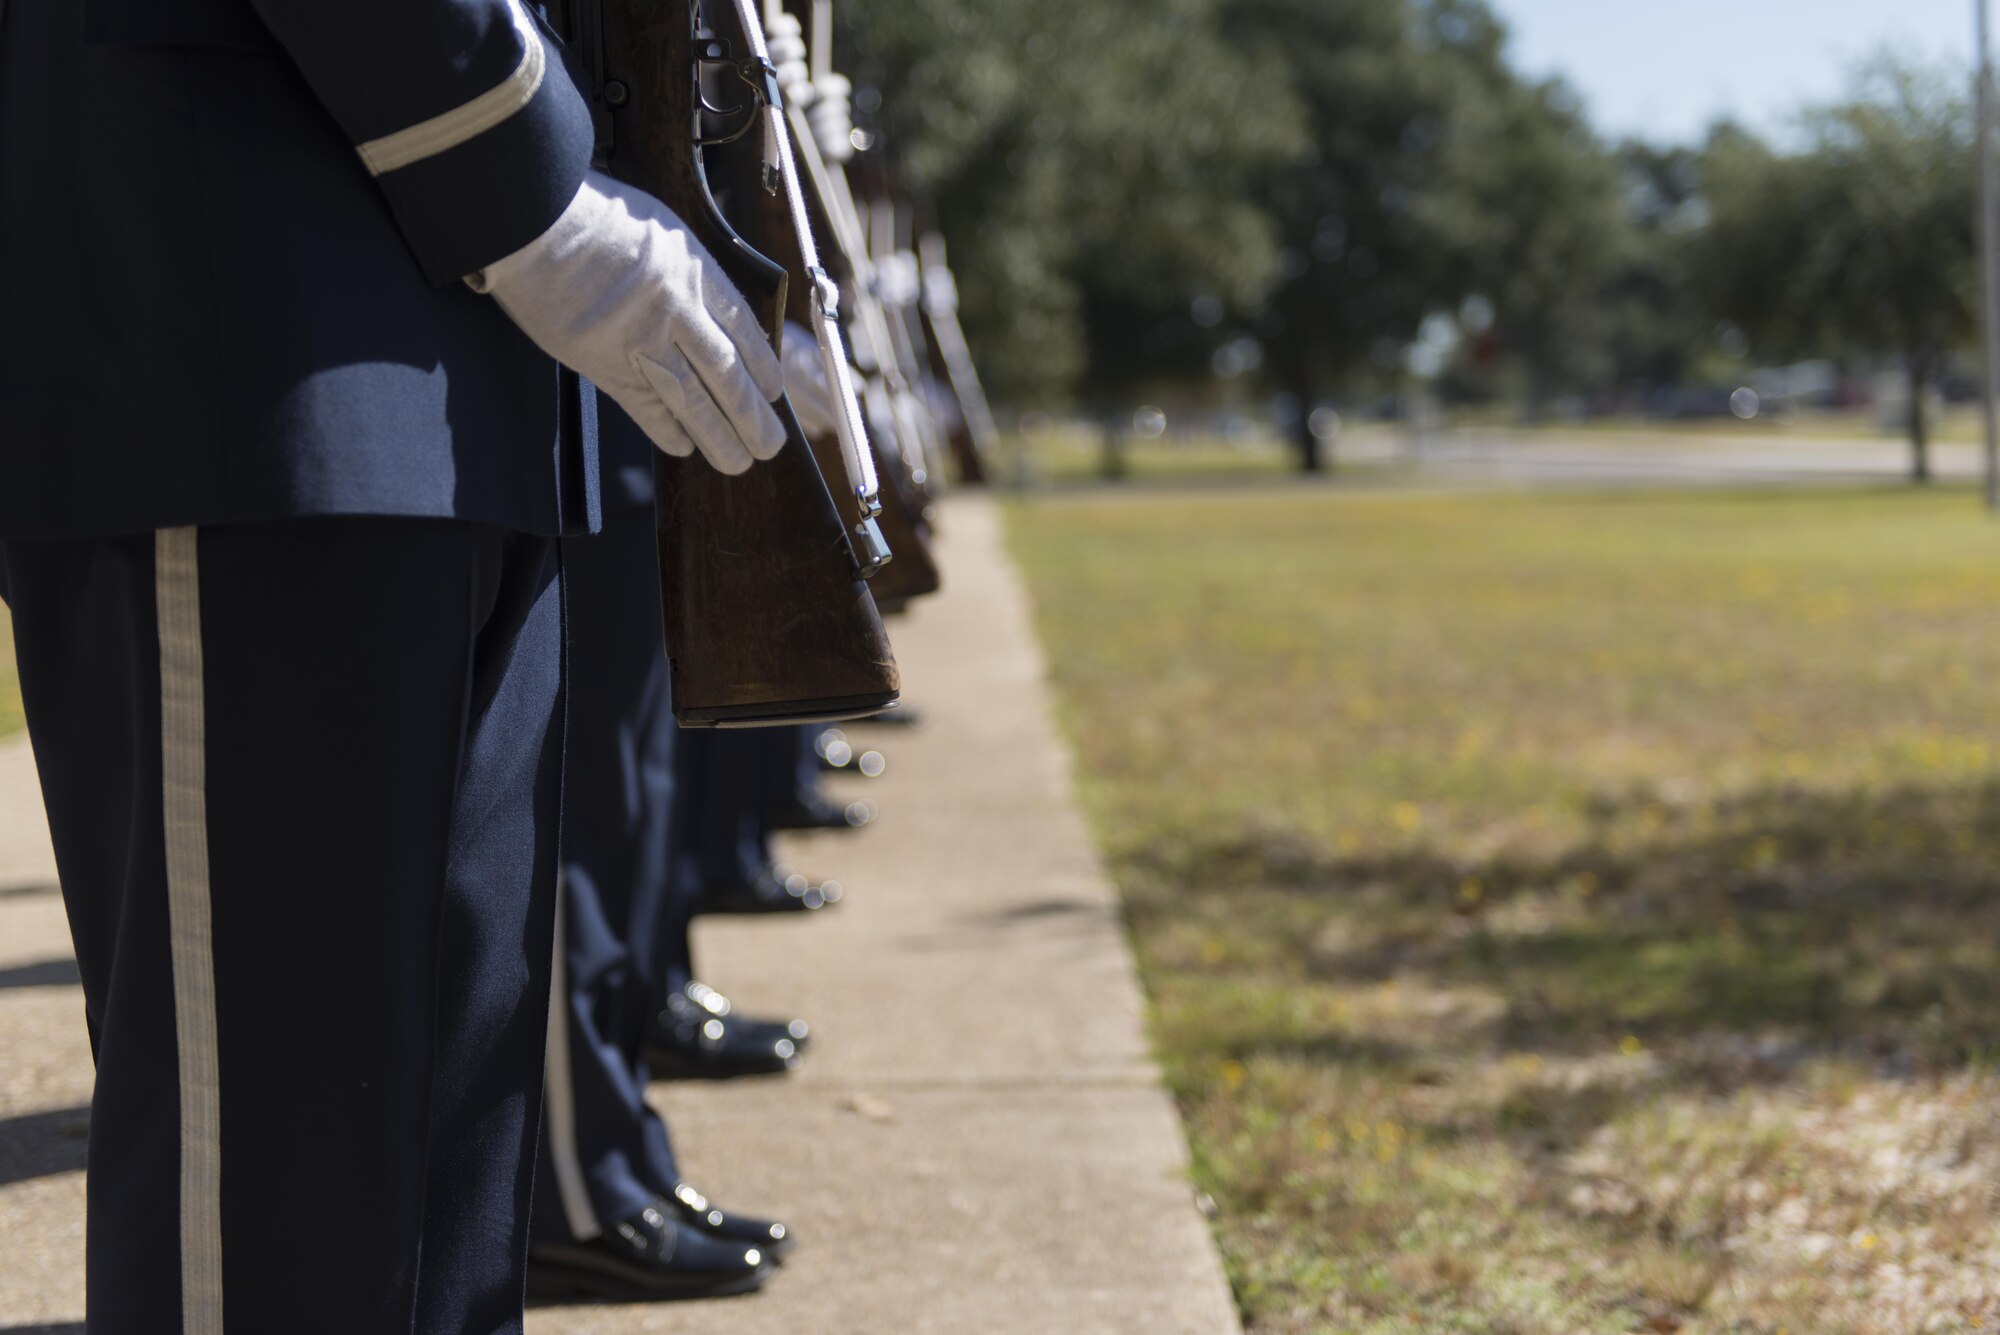 Keesler Honor Guard firing party members render military honors during a mock active duty funeral Oct. 12, 2016, on Keesler Air Force Base, Miss. Keesler Honor Guard members were trained on the proper wear of the ceremonial uniform, firing party, presentation of the colors and pallbearer duties during an eight day course with the Air Force Honor Guard Mobile Training Team. The team ended the training with a mock active duty funeral and graduation ceremony. (U.S. Air Force photo by Andre’ Askew/Released)